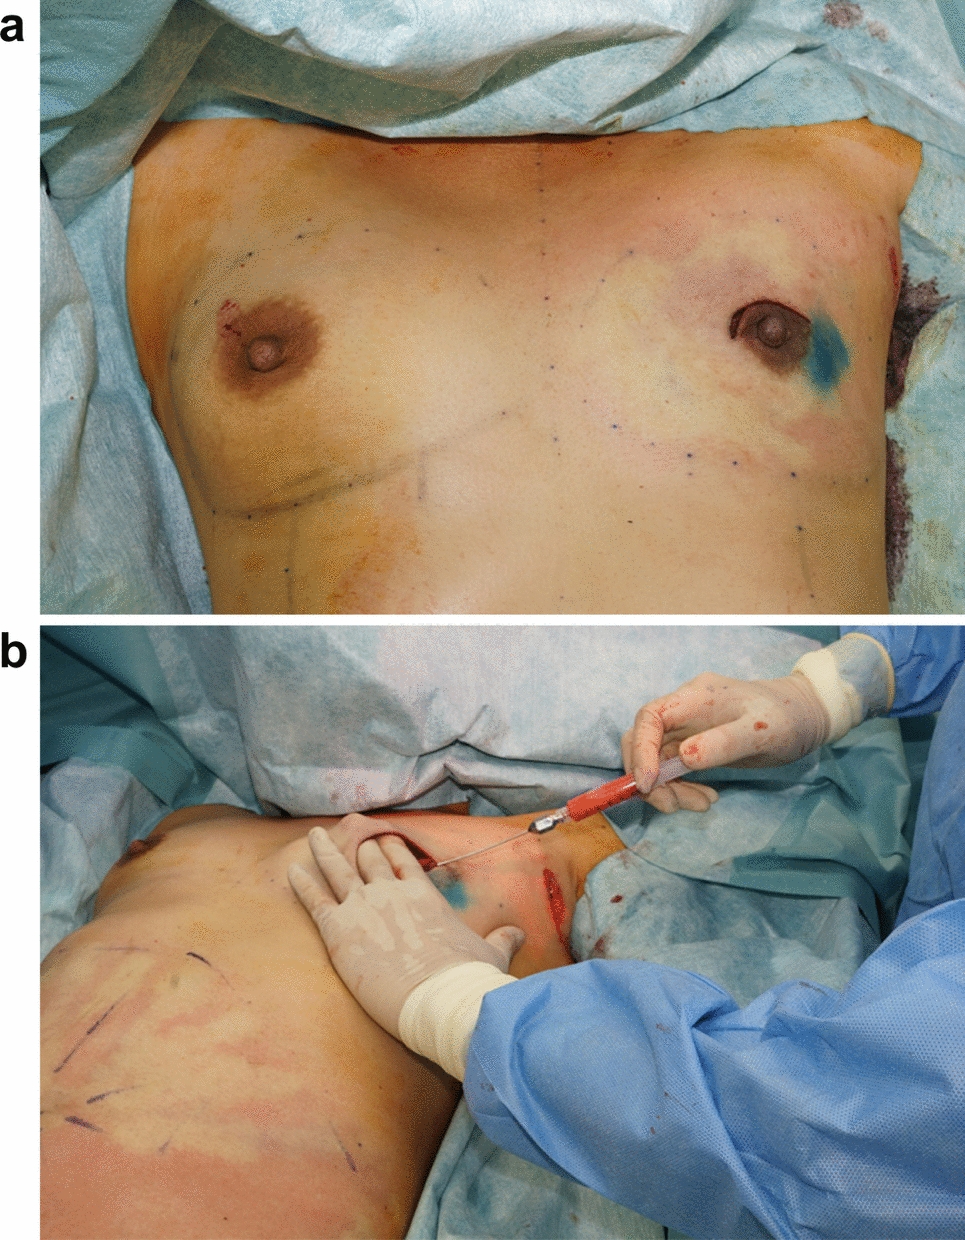 Endoscopic mastectomy followed by immediate breast reconstruction with fat grafting for breast cancer